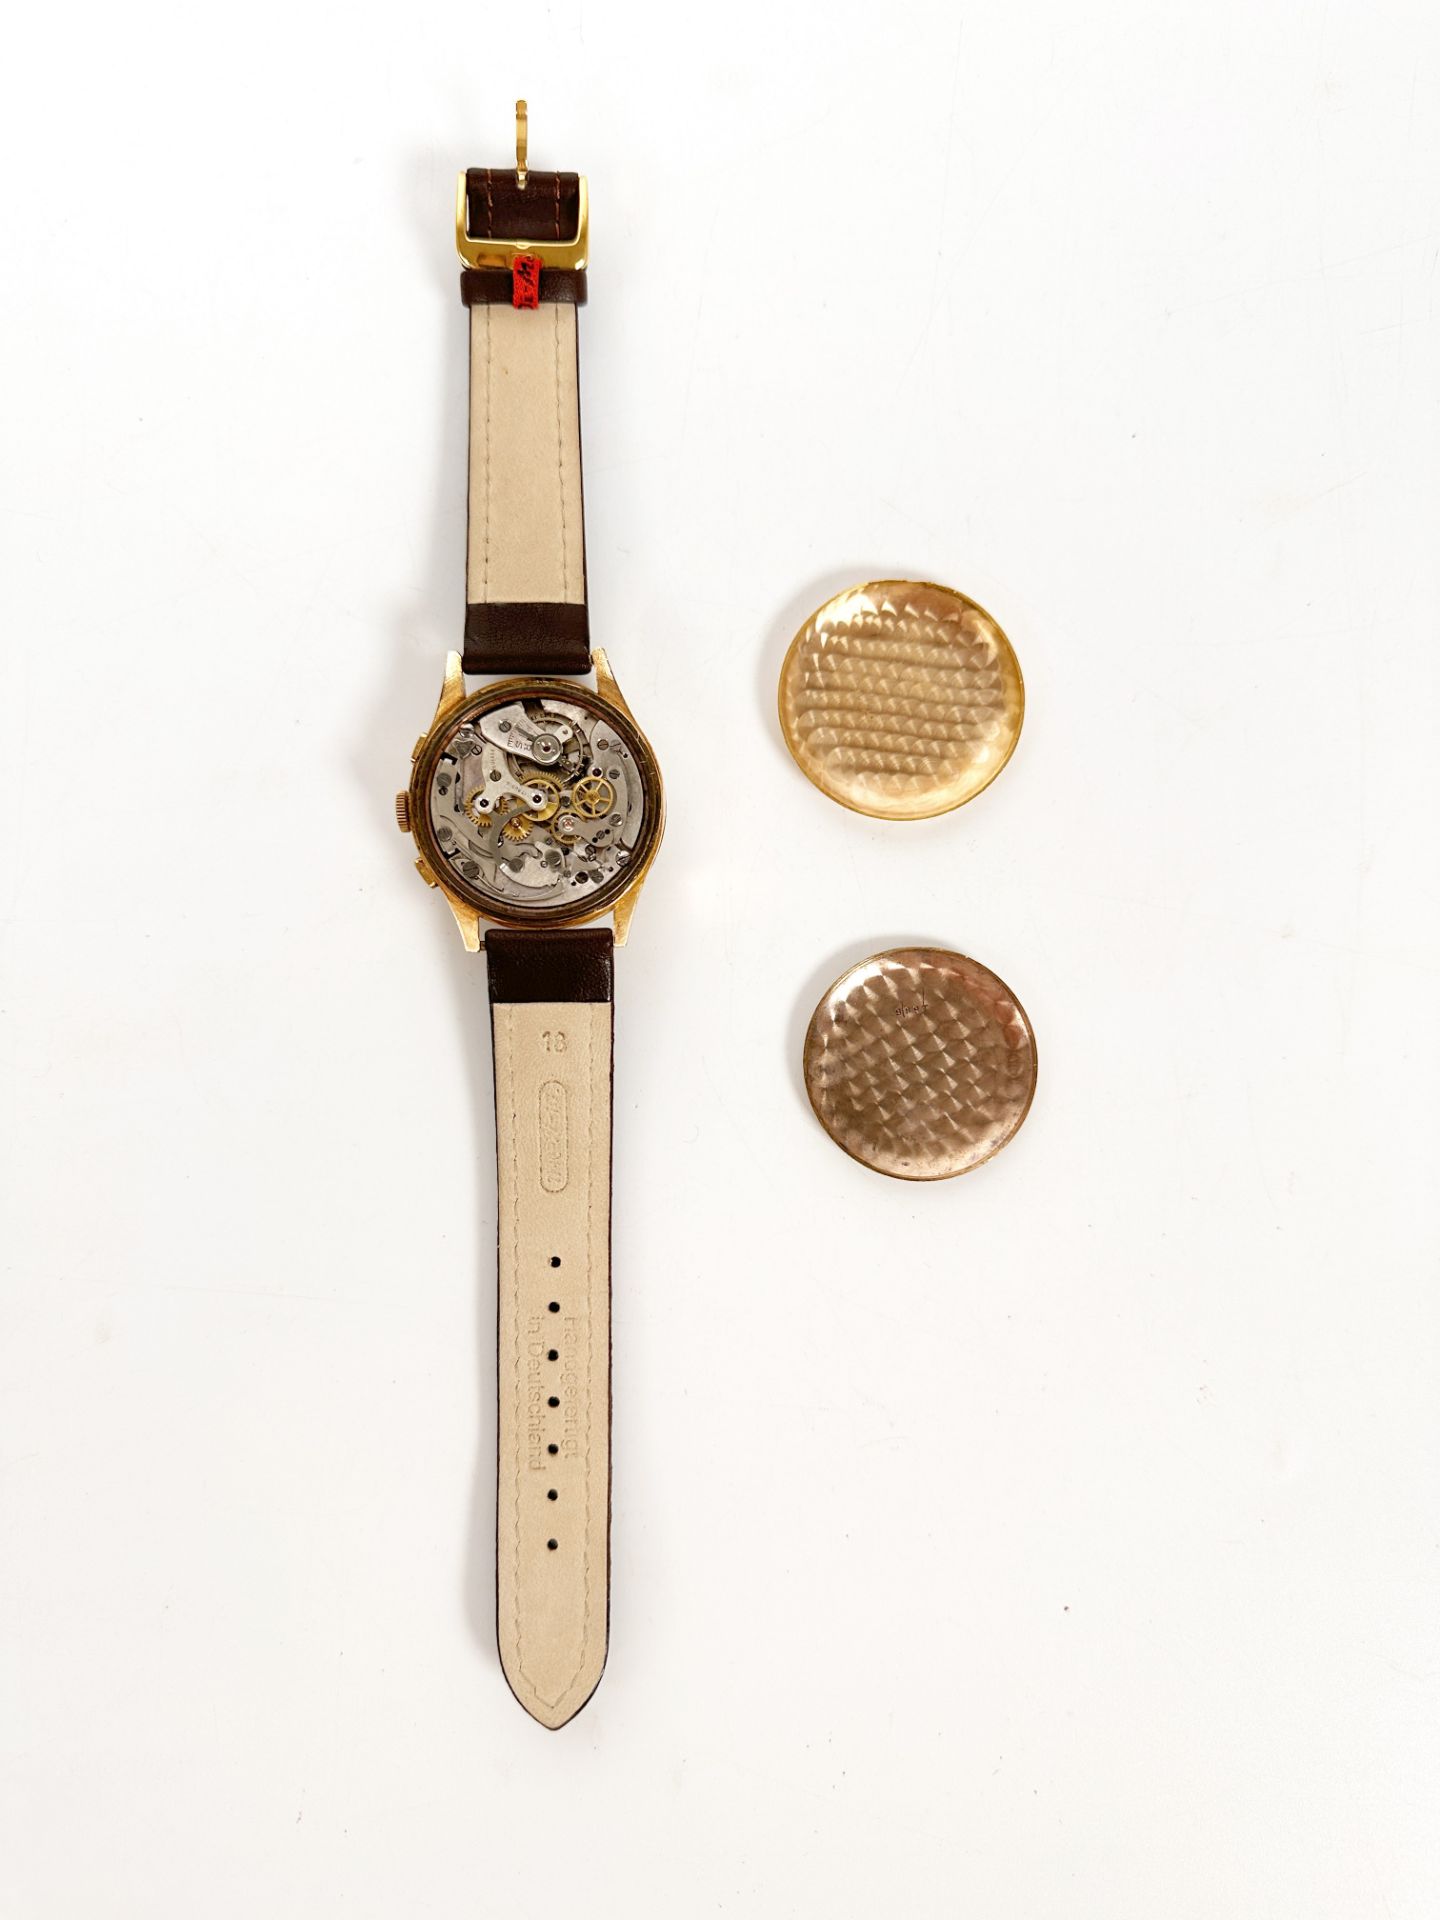 No Reserve - Orator Chronograph Suisse - Men's watch. - Image 6 of 7